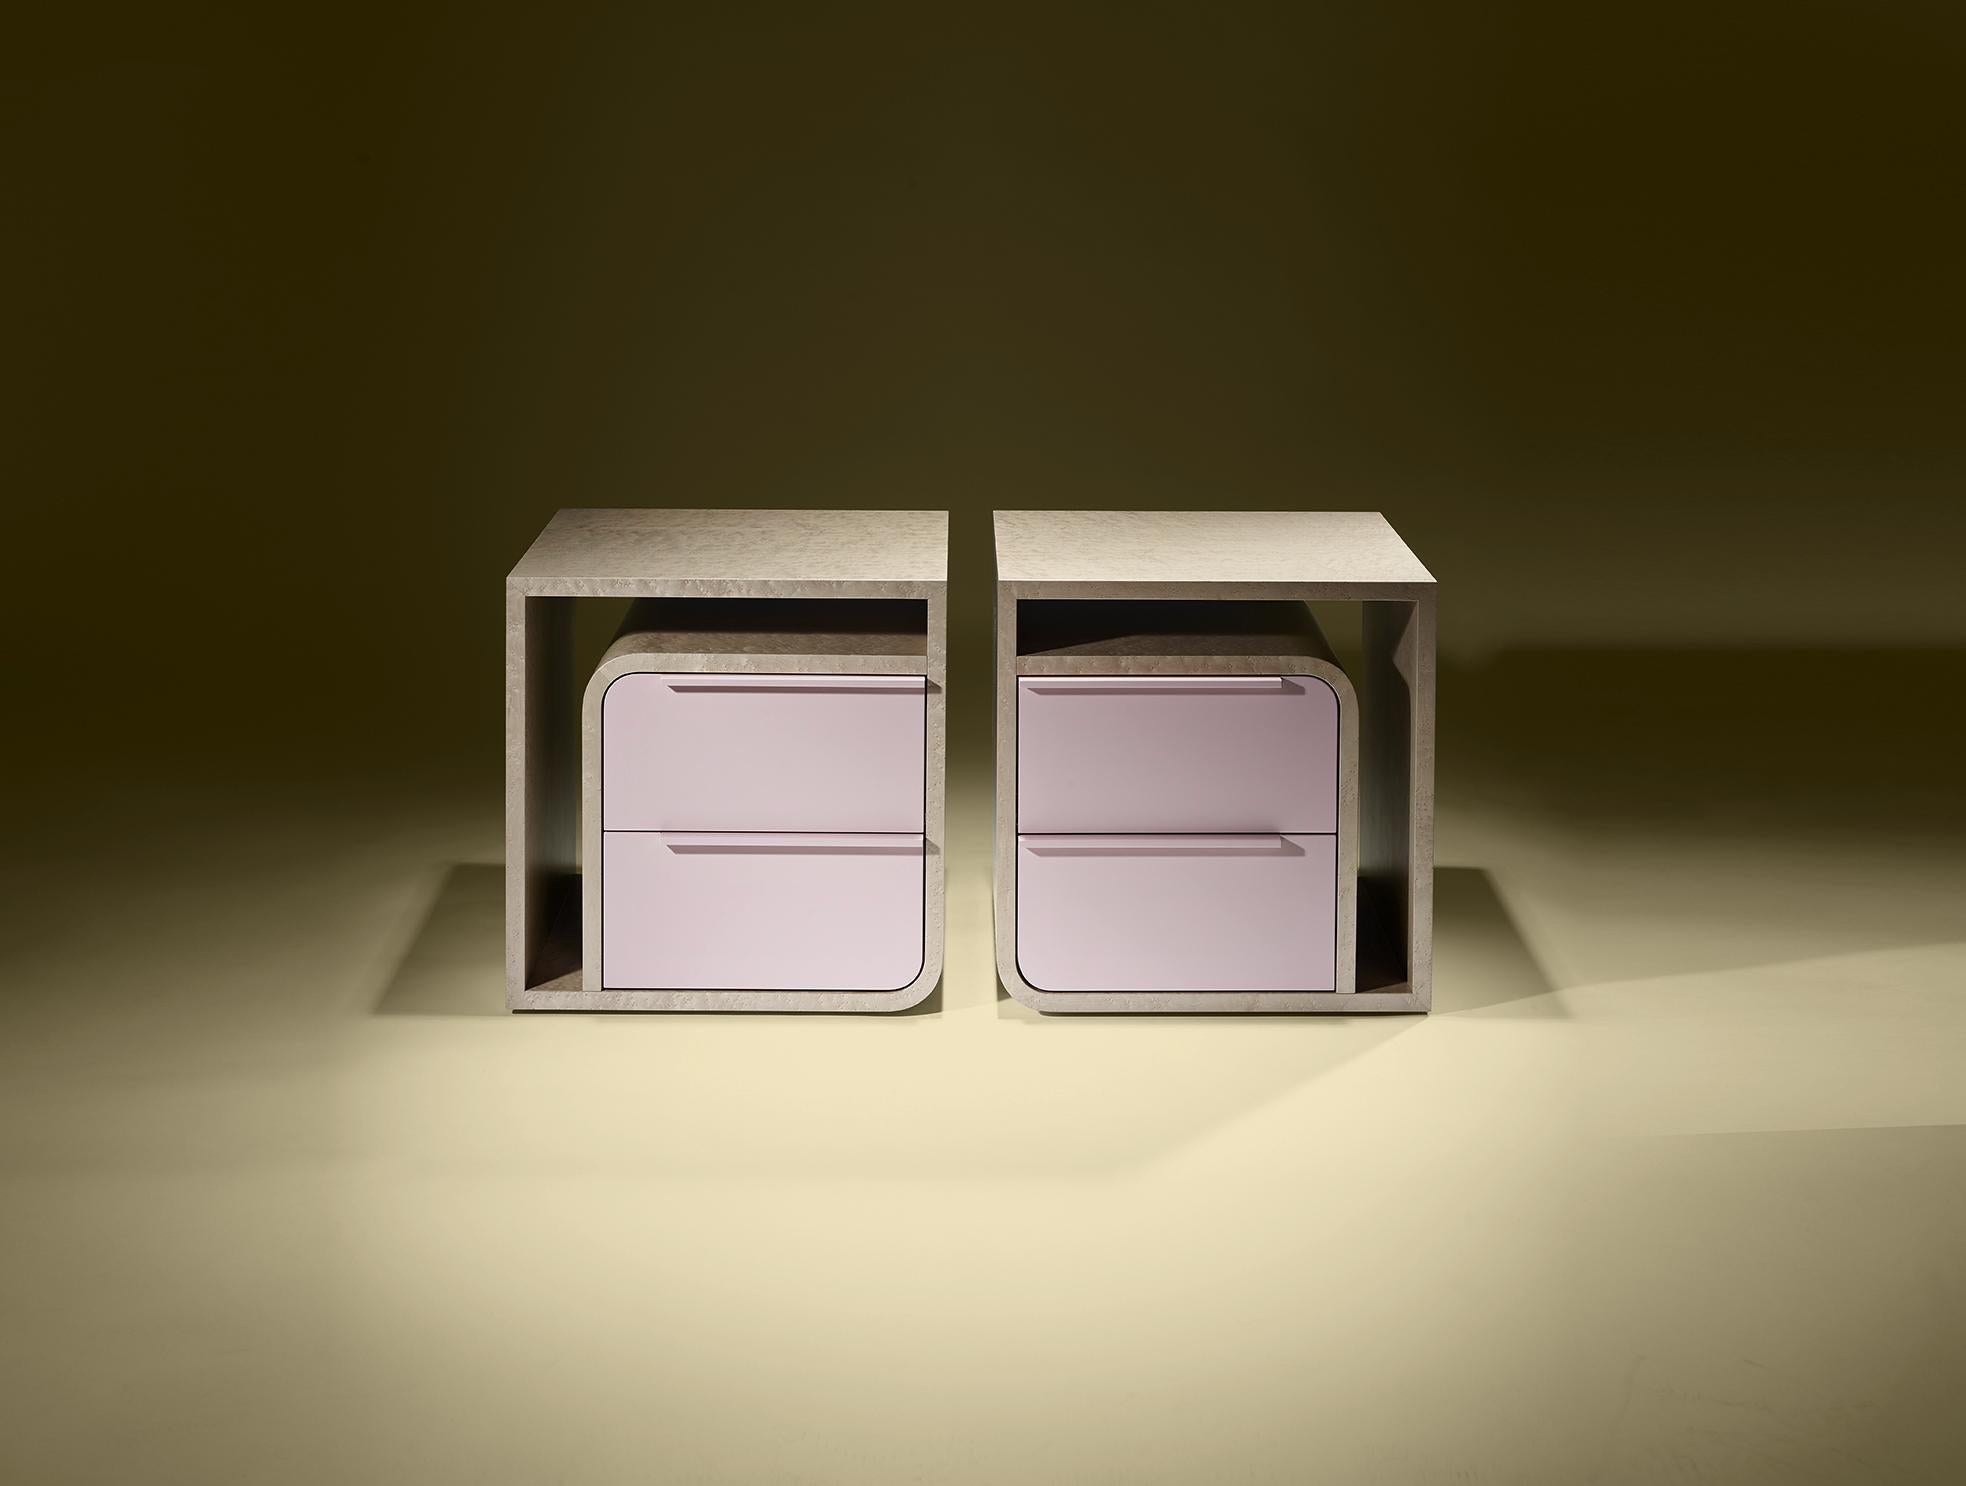 Contemporary lacquered bedside table with two drawers.

Bespoke / Customizable
Identical shapes with different sizes and finishings.
All RAL colors available. (Mate / Half Gloss / Gloss)